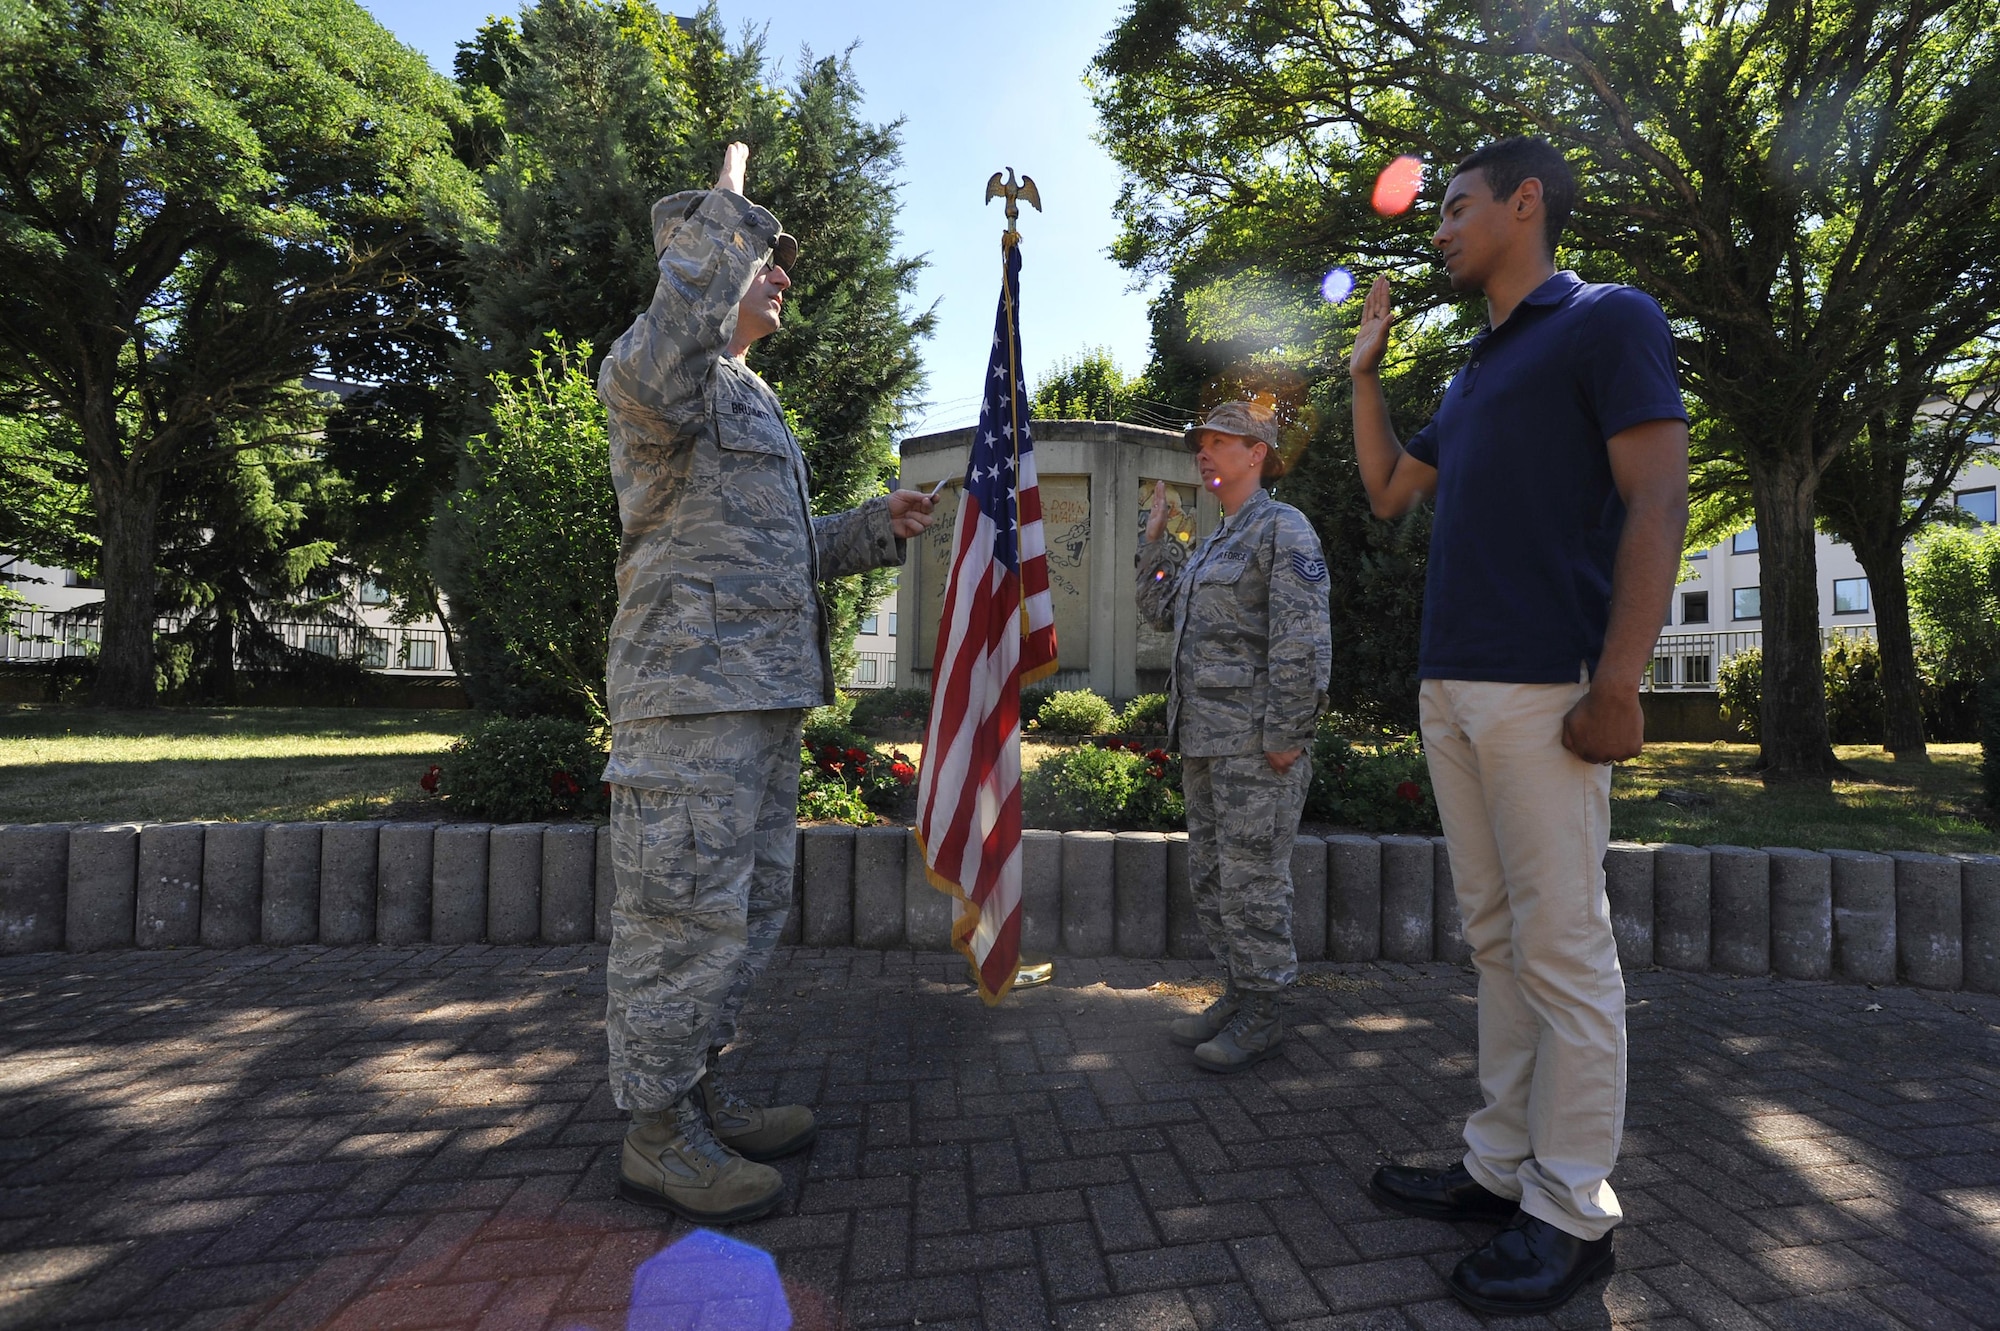 U.S. Air Force Lt. Col. Steven Brummitt, 86th Communications Squadron commander, administers the oath of enlistment to U.S. Air Force Tech. Sgt. Jamee Dean, 86th Communications Squadron communication focal point section chief, and her son Shandon Dean at the Berlin Wall Memorial at the Ramstein Officer’s Club, Ramstein Air Base, June 26, 2017. Colleagues, friends, and family members attended the brief ceremony allowing Tech. Sgt. Dean to reenlist at the same time her son enlists in the Air Force.  (U.S. Air Force photo by Airman 1st Class D. Blake Browning)